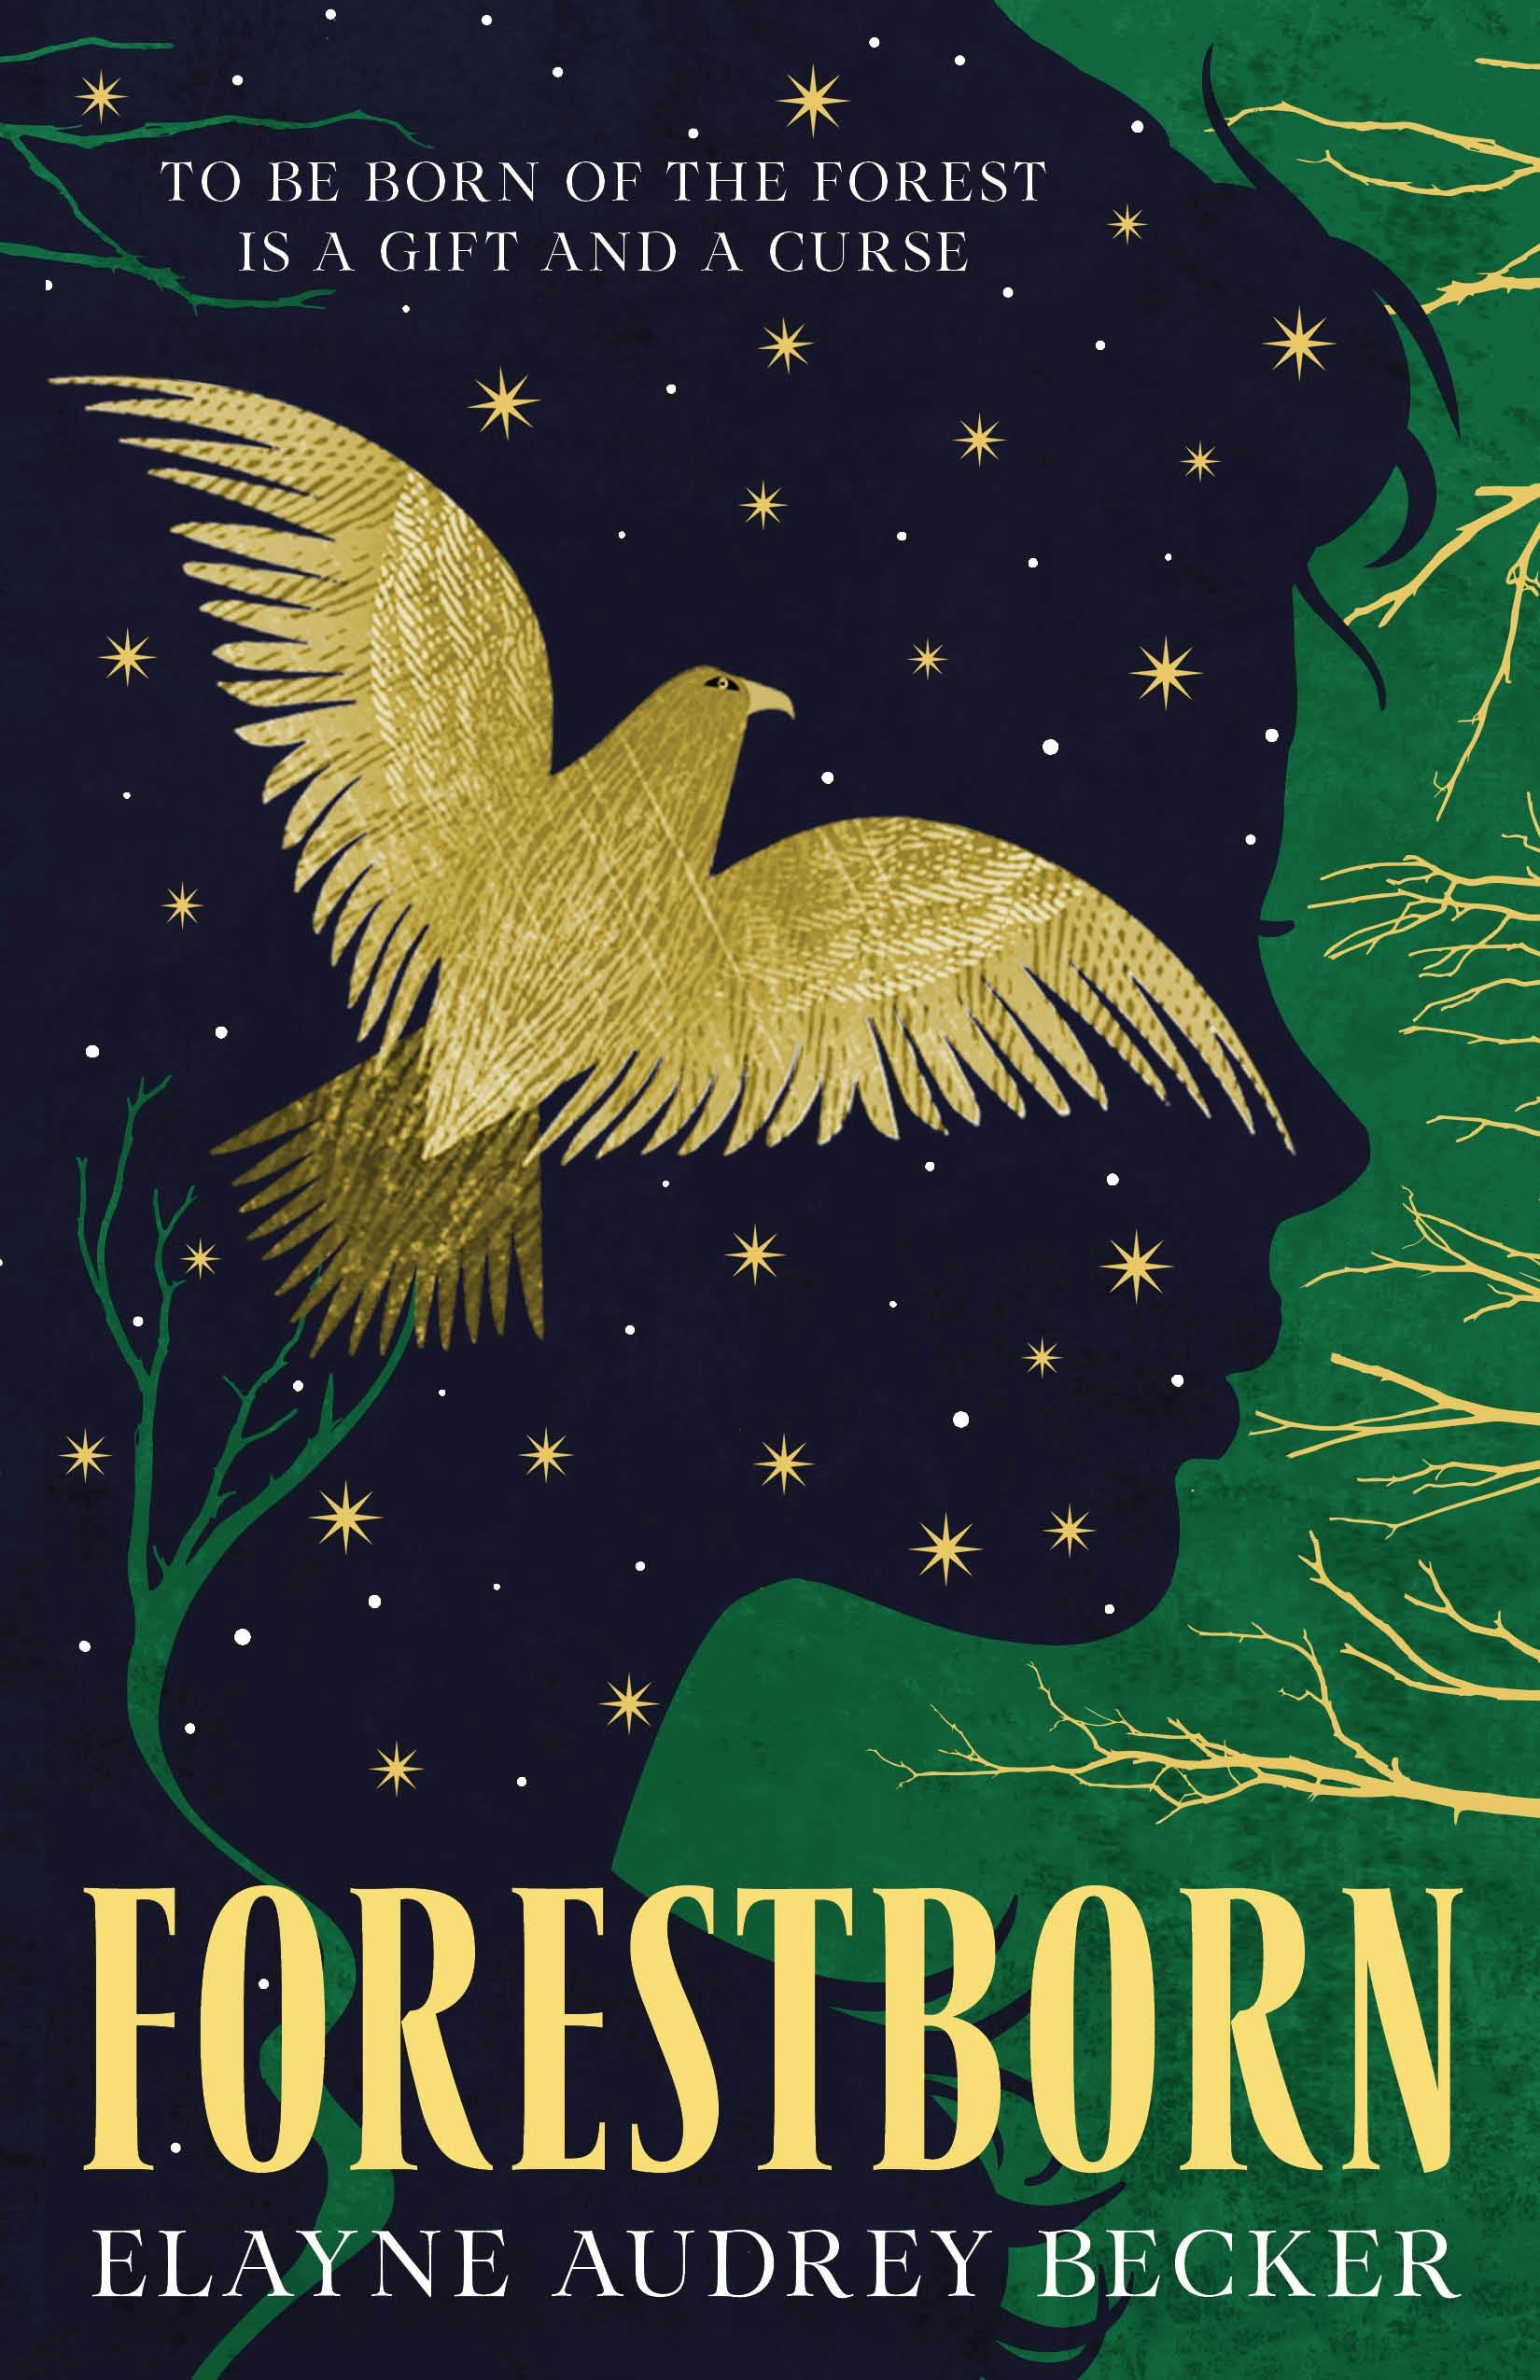 Cover for the book titled as: Forestborn